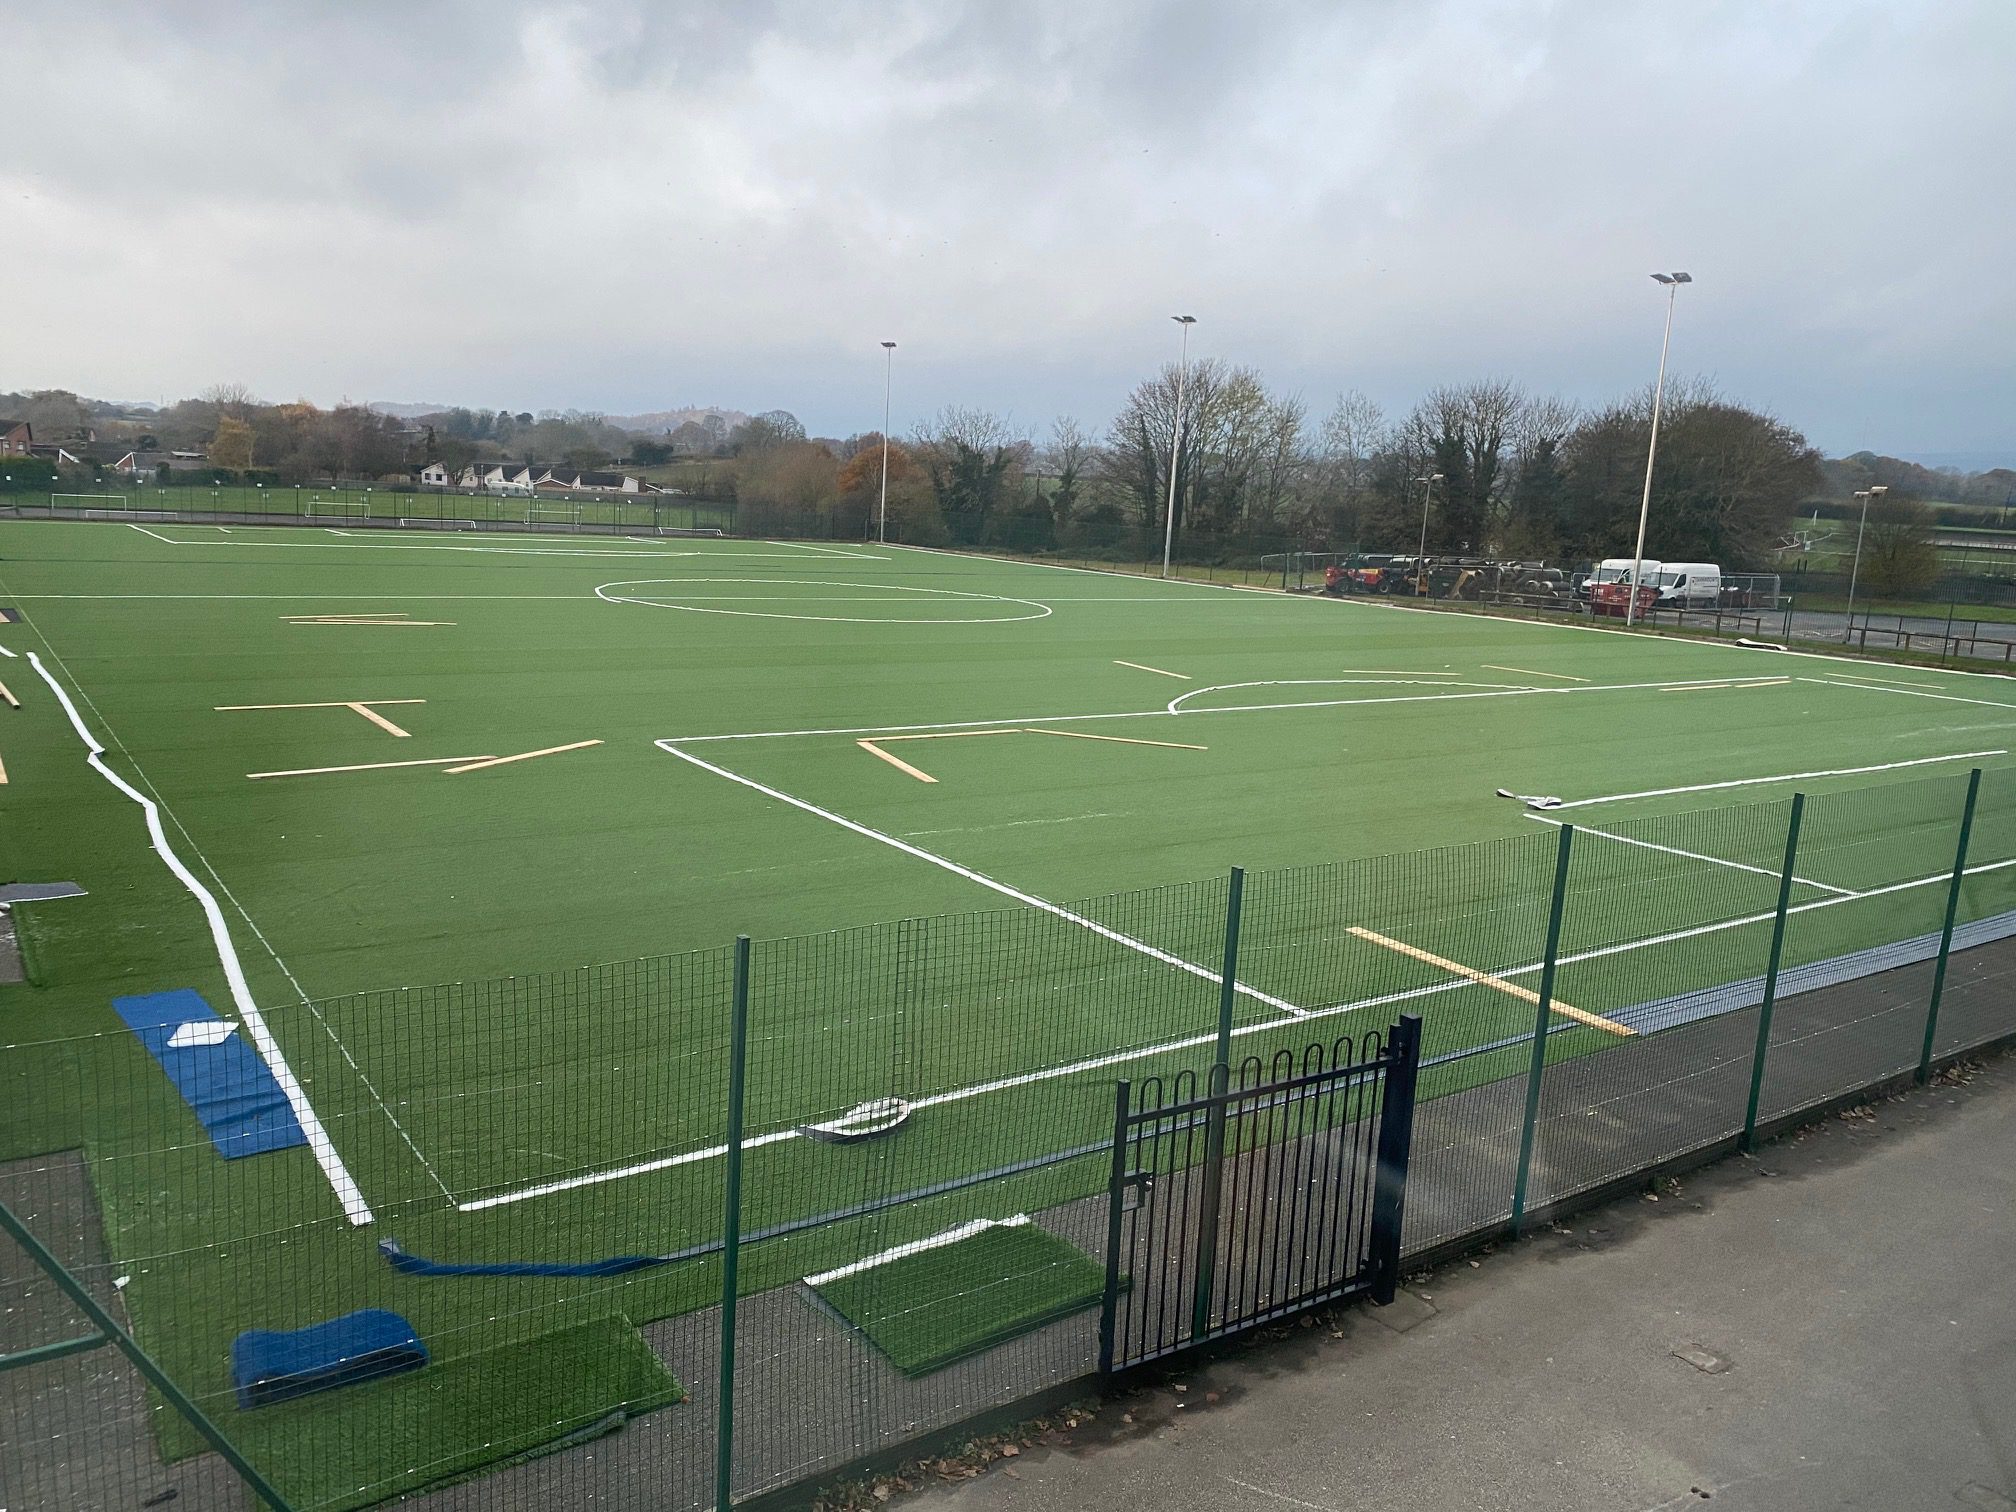 New 3G pitch at Clywedog isn't far off - take a look!